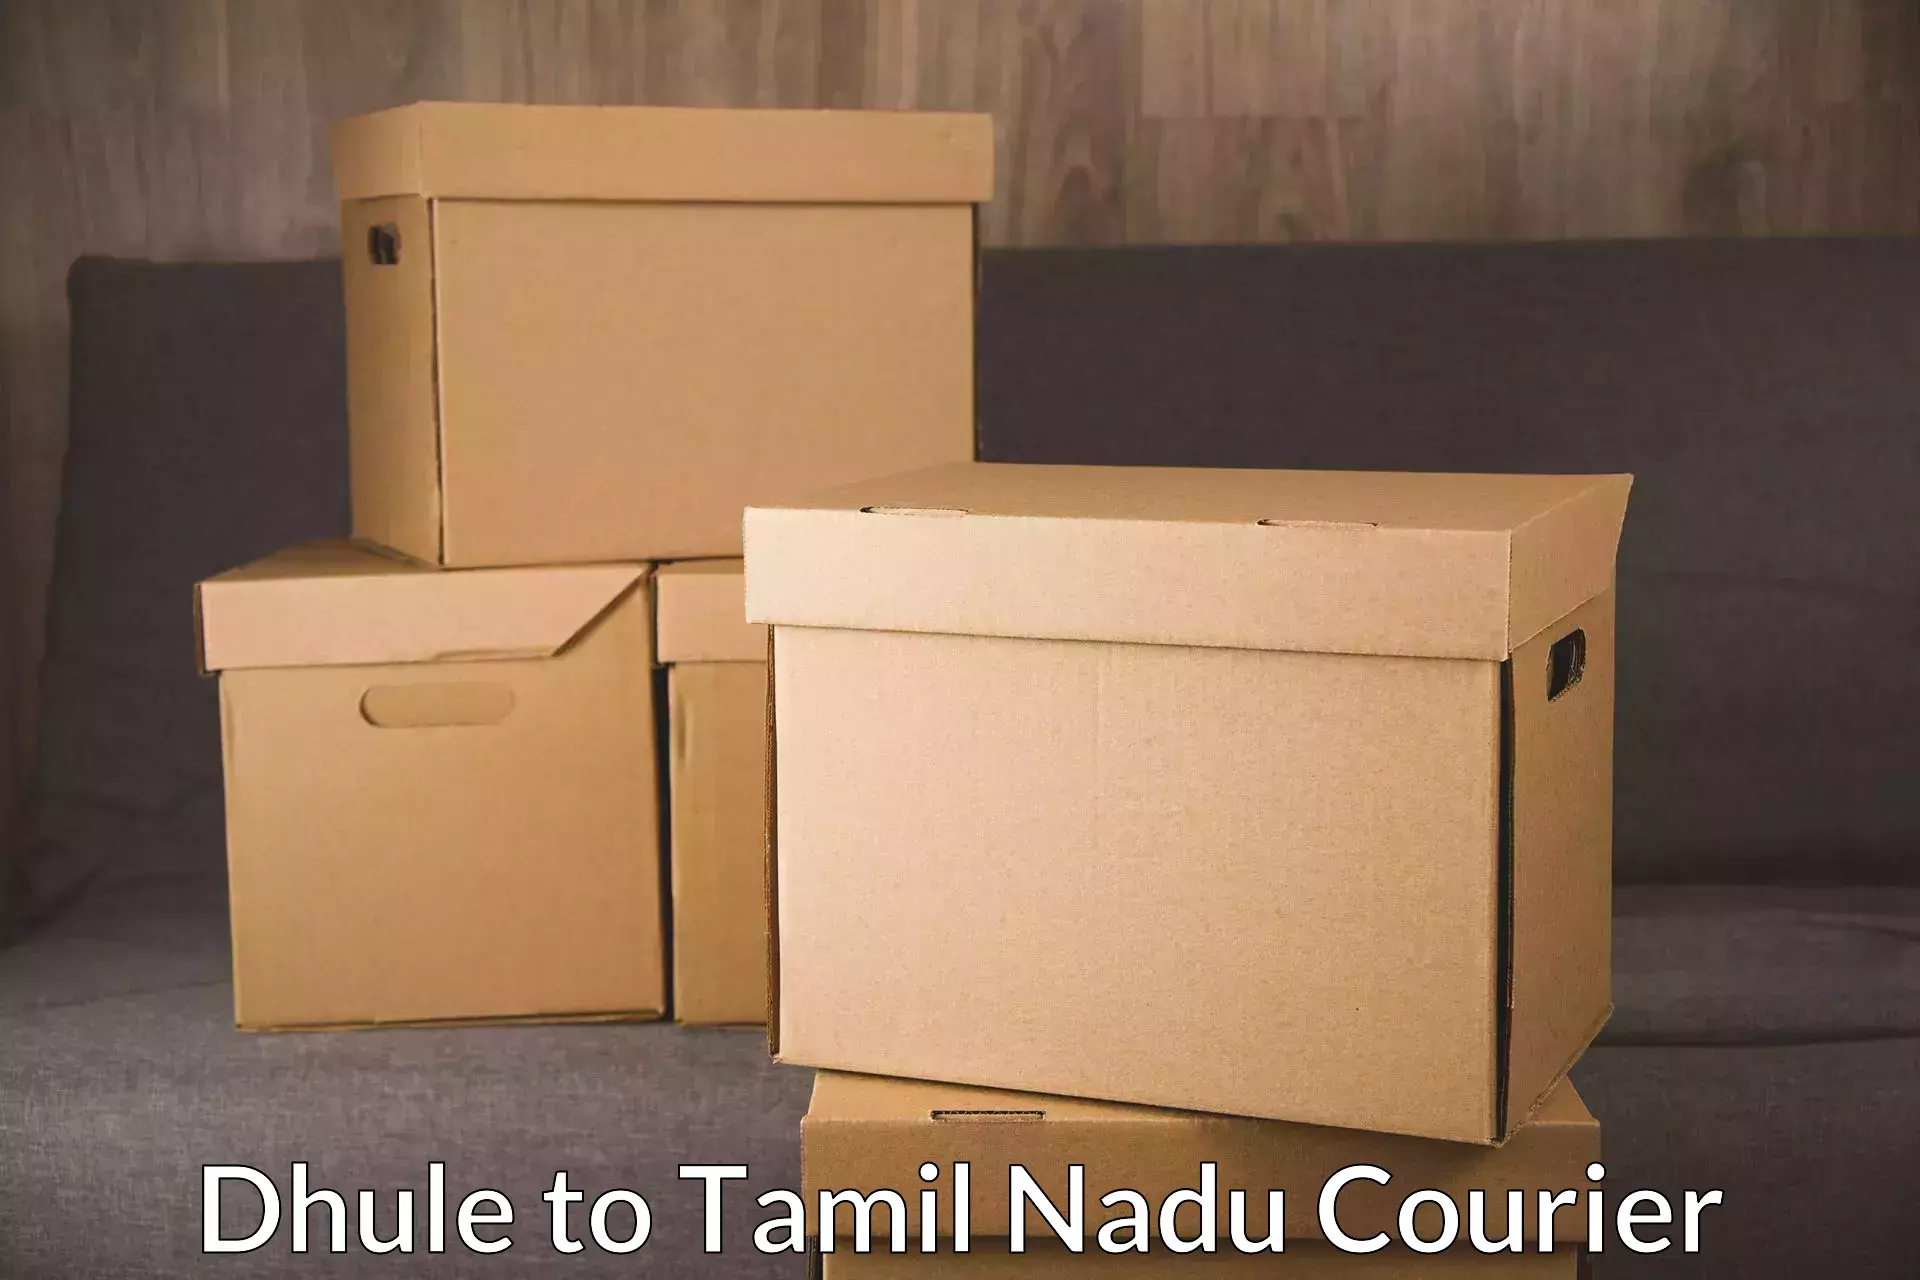 Fast delivery service Dhule to Tamil Nadu